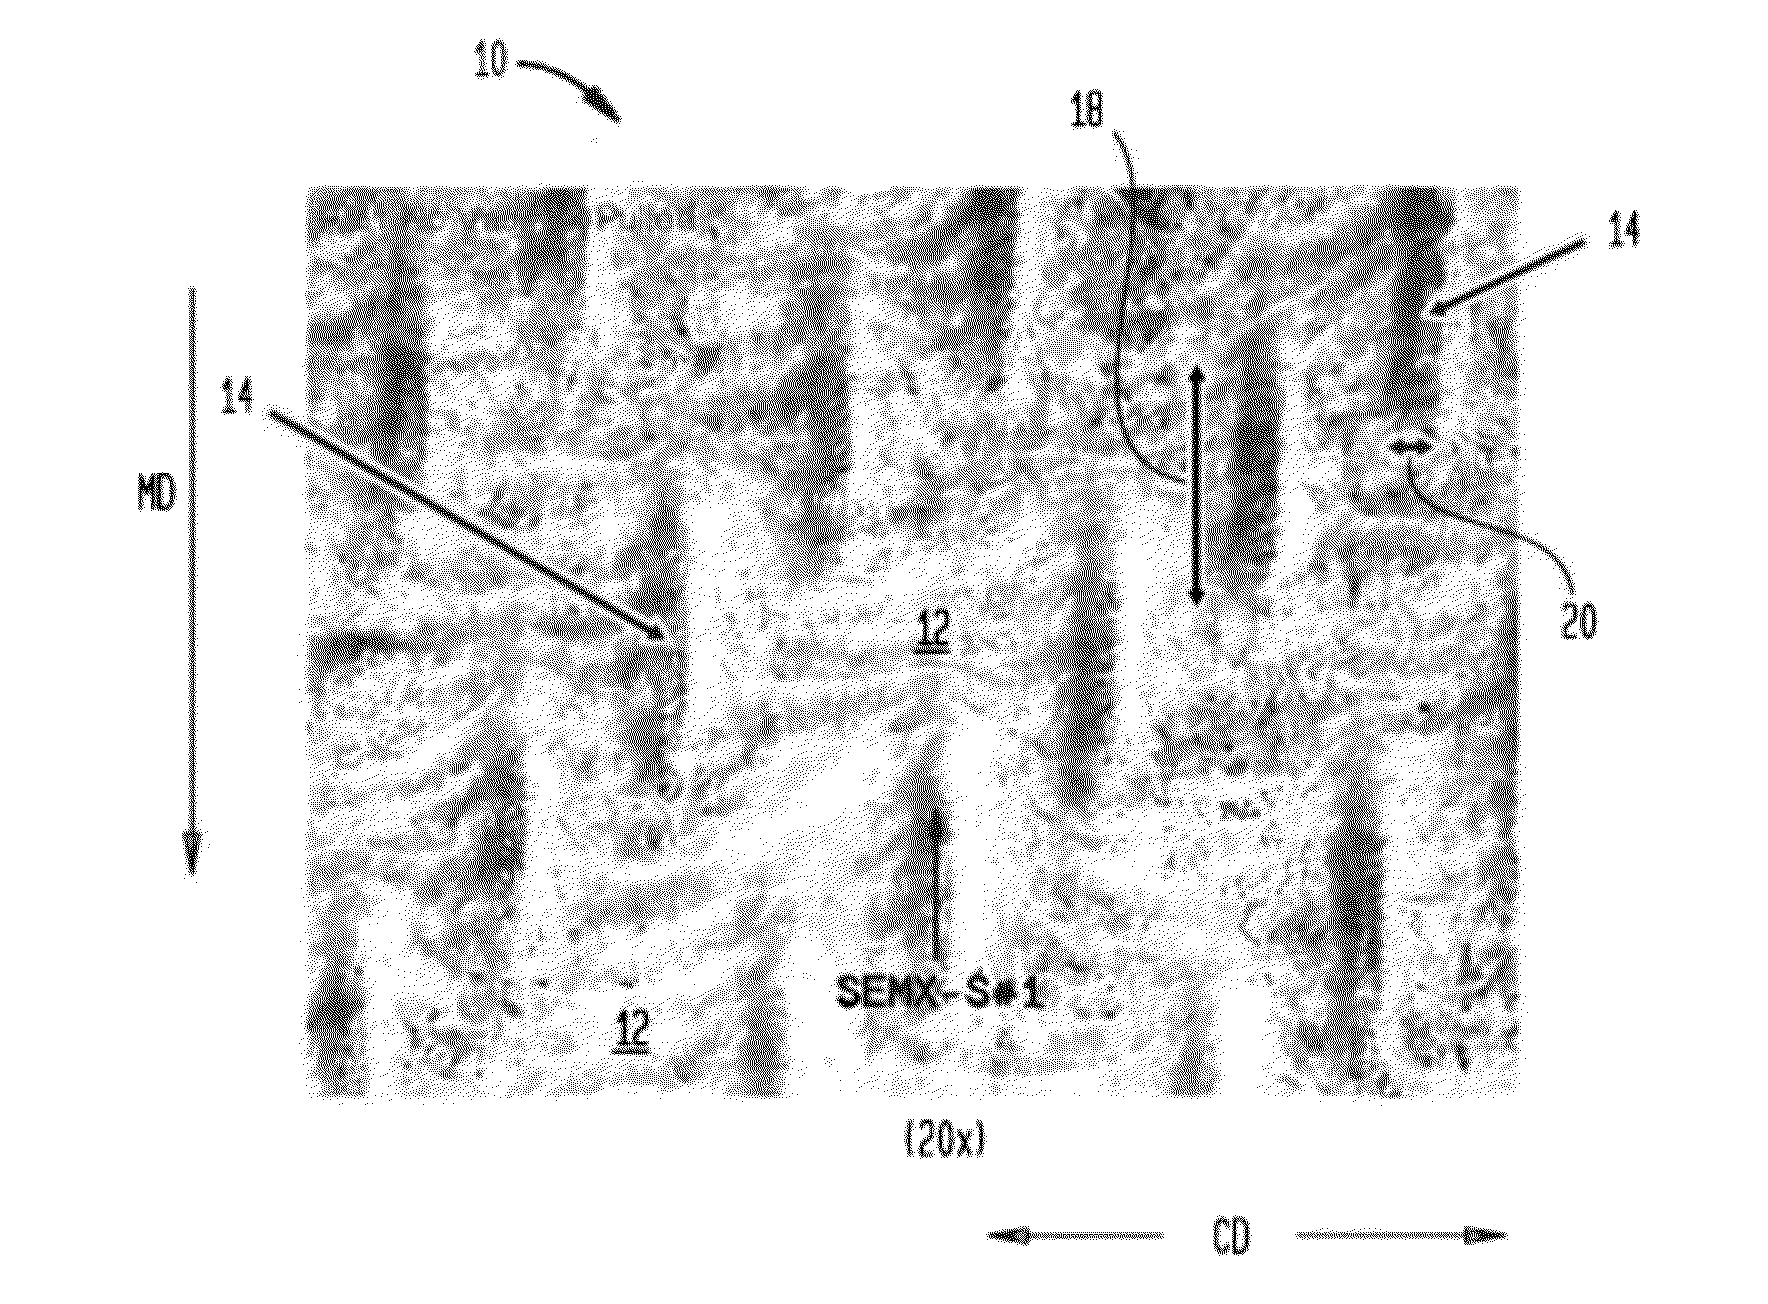 Absorbent Sheet of Cellulosic Fibers